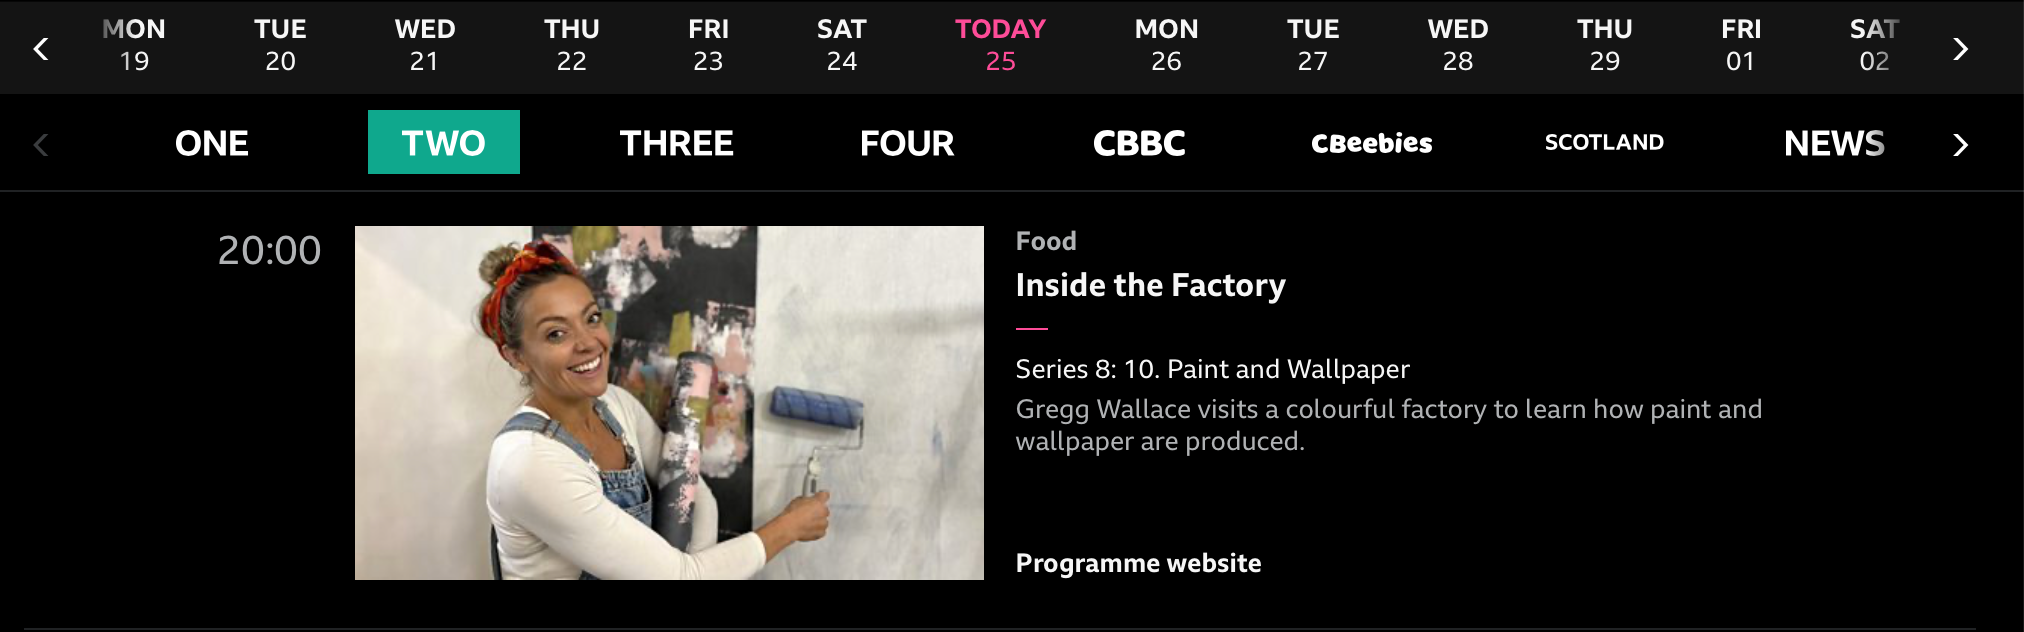 BBC TWO - Inside the Factory